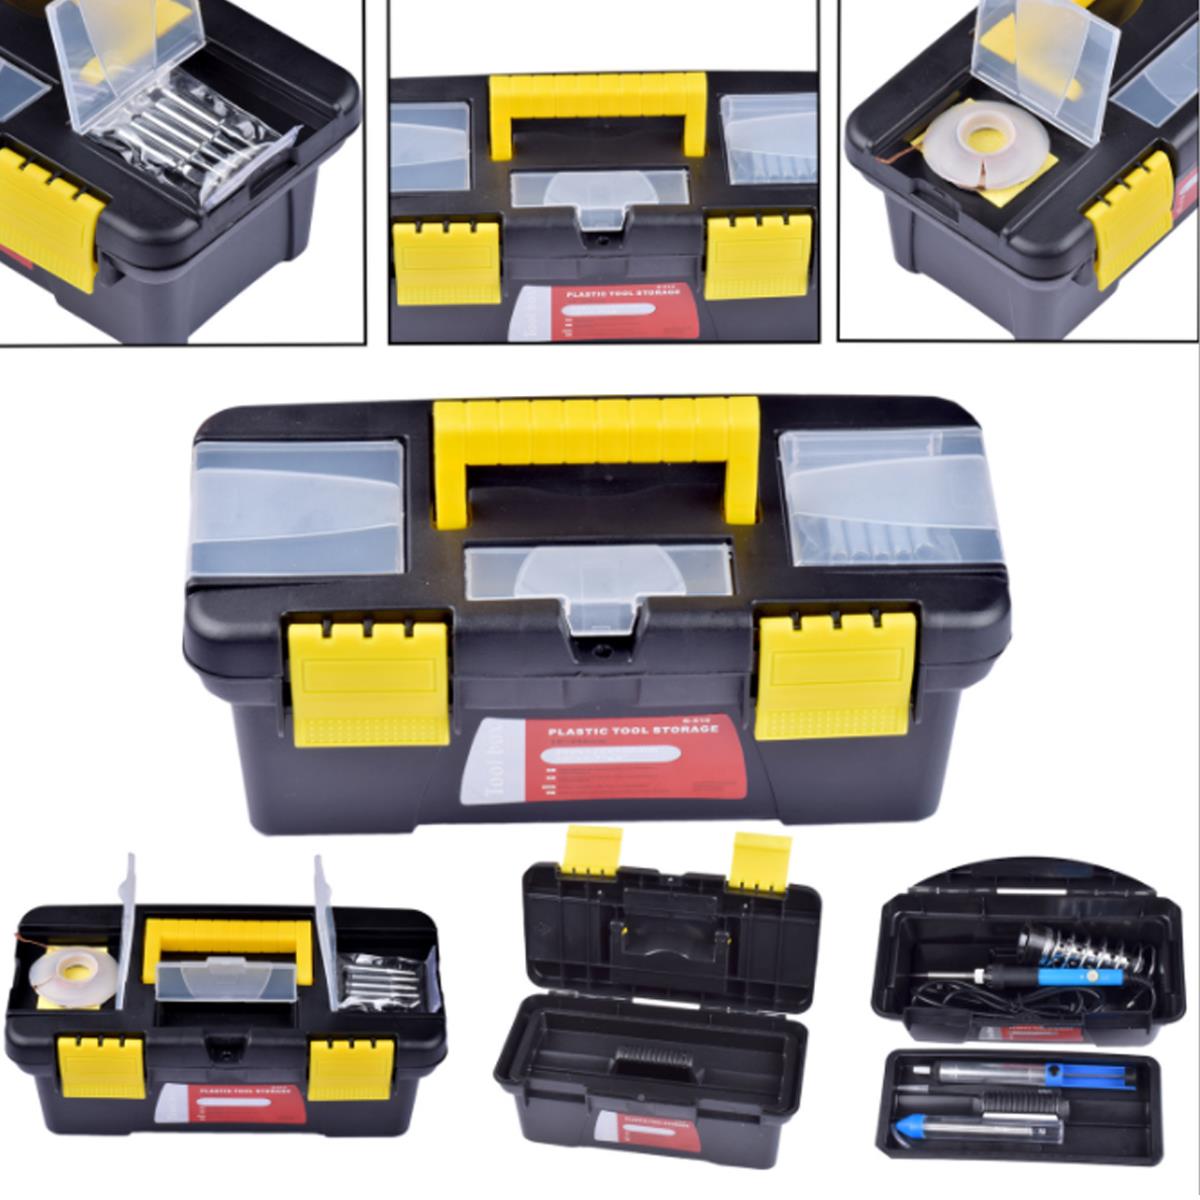 110220V-60W-Adjustable-Temperature-Electric-Welding-Soldering-Tools-Kit-with-Switch-1284249-7